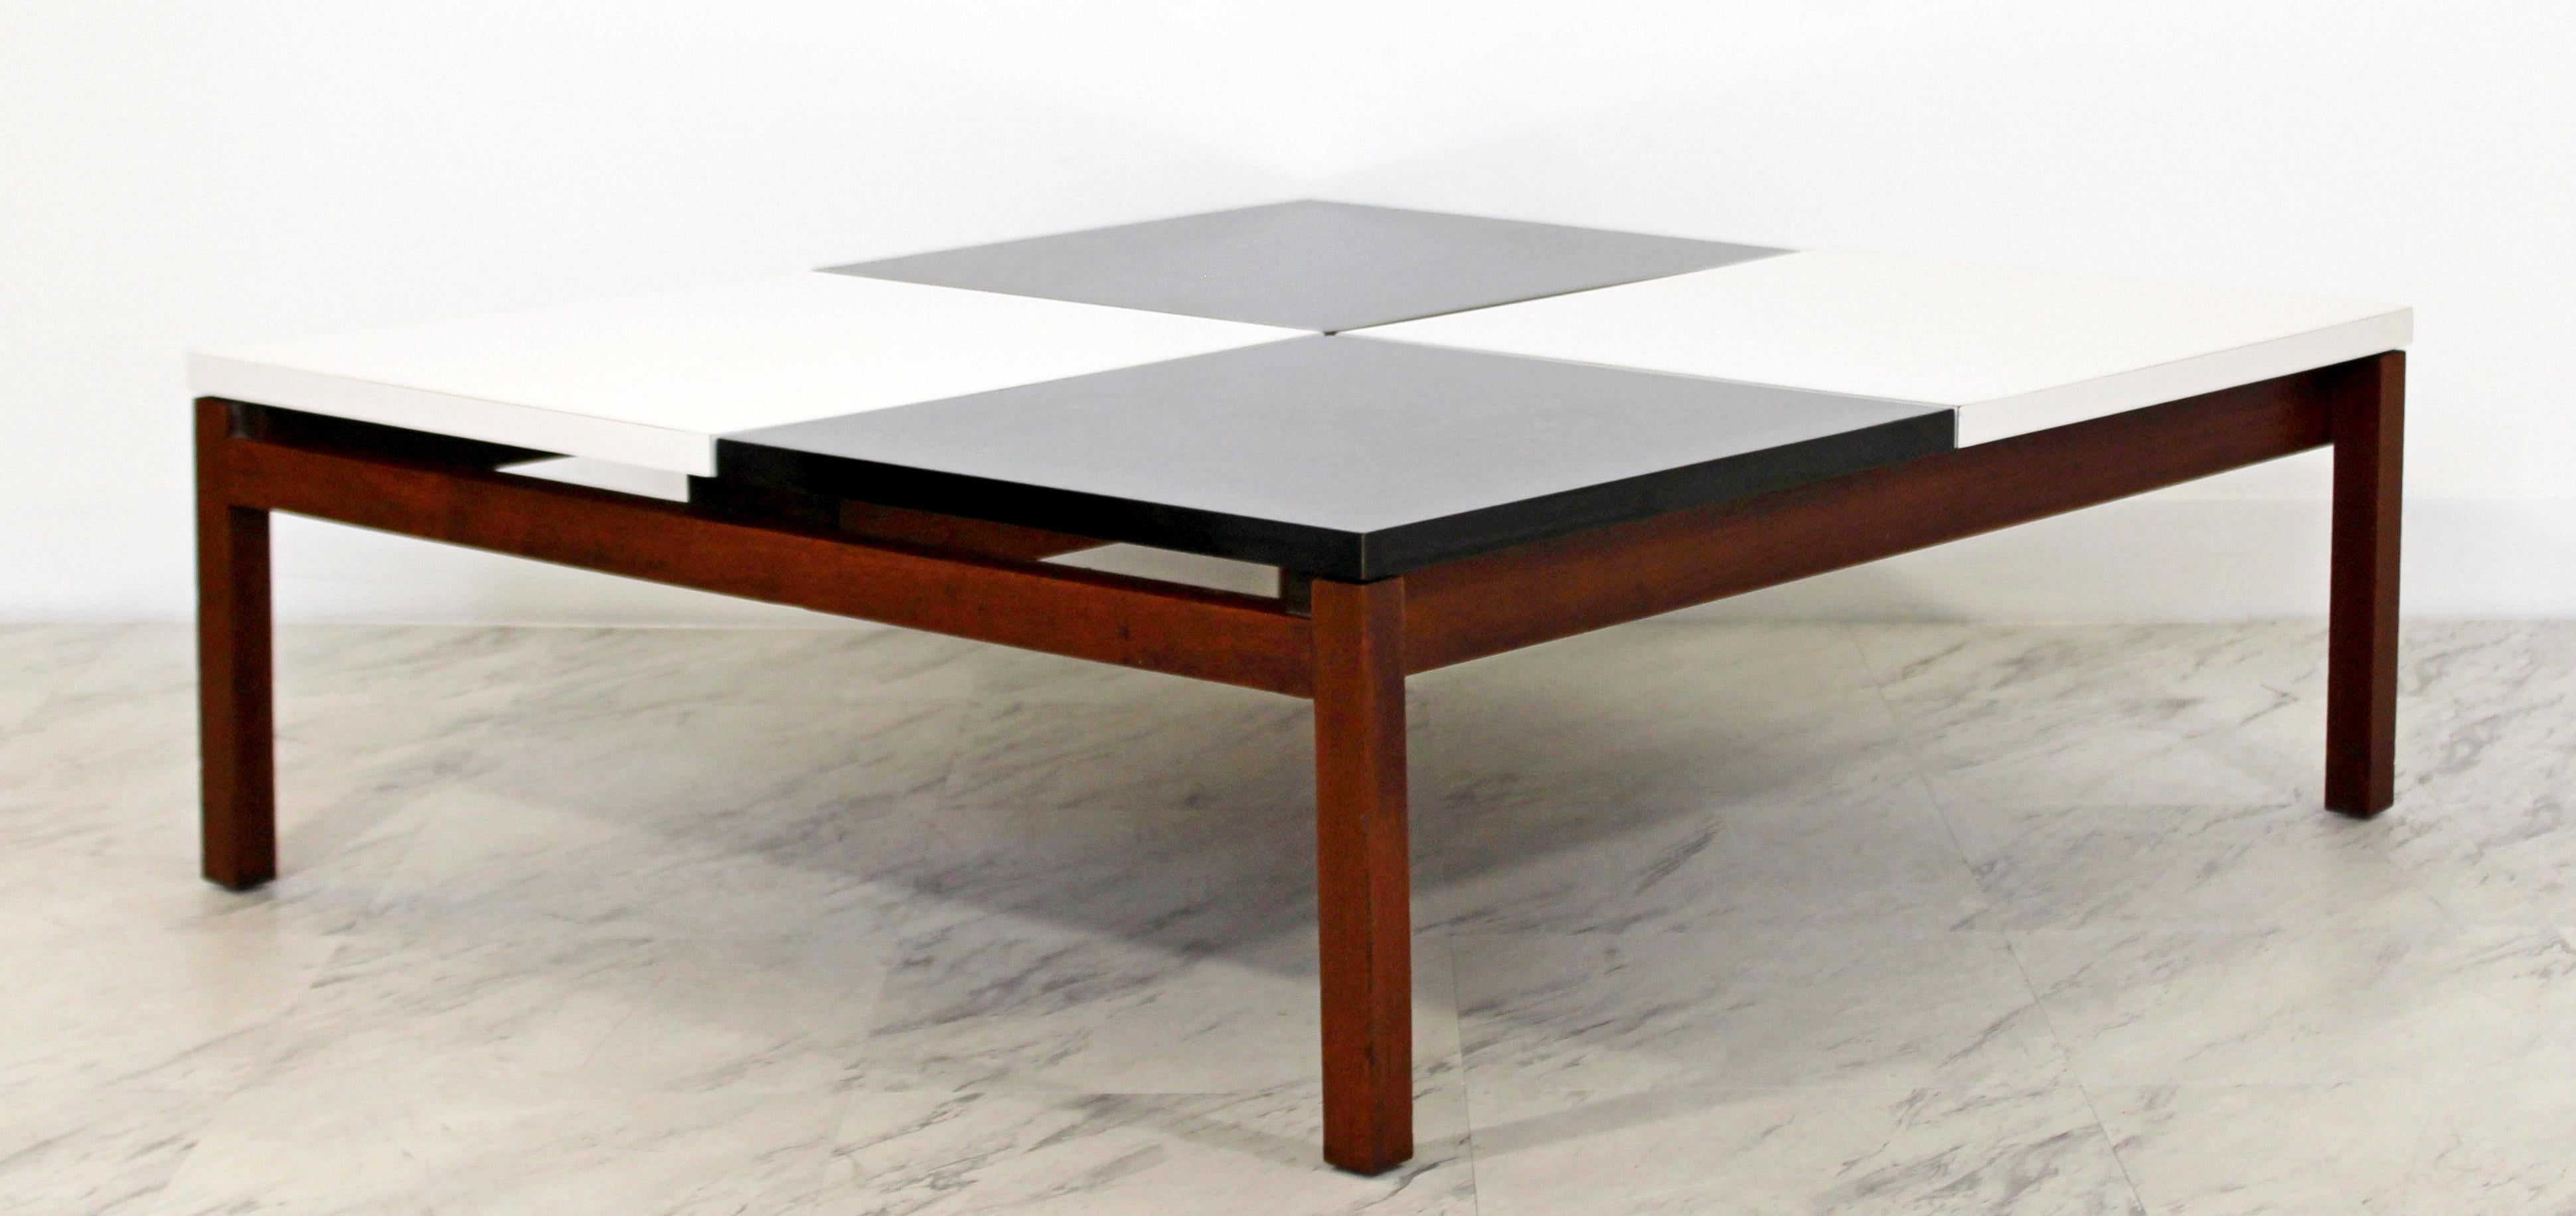 Mid-20th Century Mid-Century Modern Black White on Wood Coffee Table by Lewis Butler Knoll 1960s